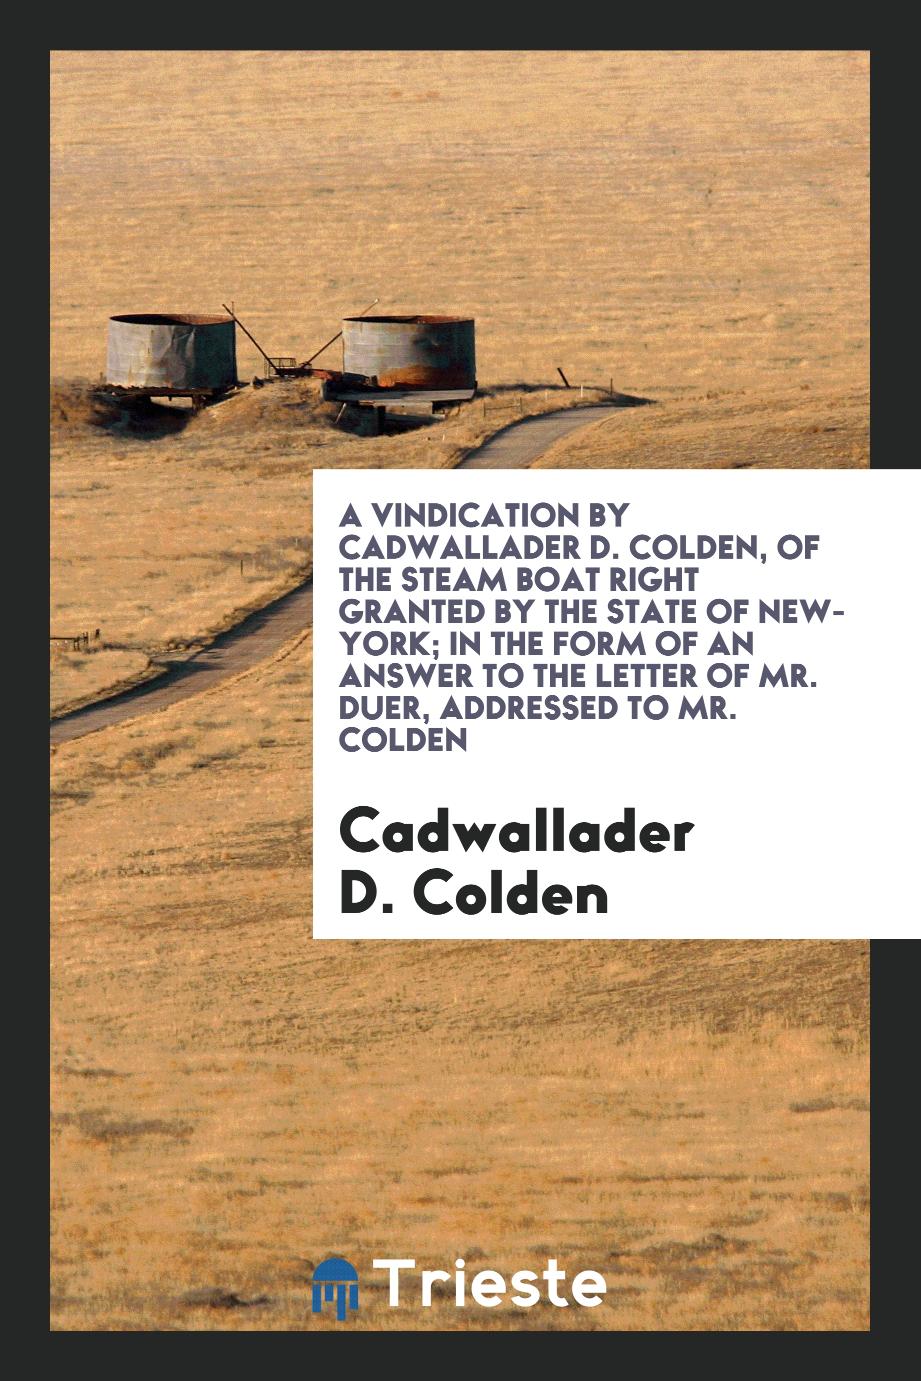 A Vindication by Cadwallader D. Colden, of the Steam Boat Right Granted by the State of New-York; In the Form of an Answer to the Letter of Mr. Duer, Addressed to Mr. Colden